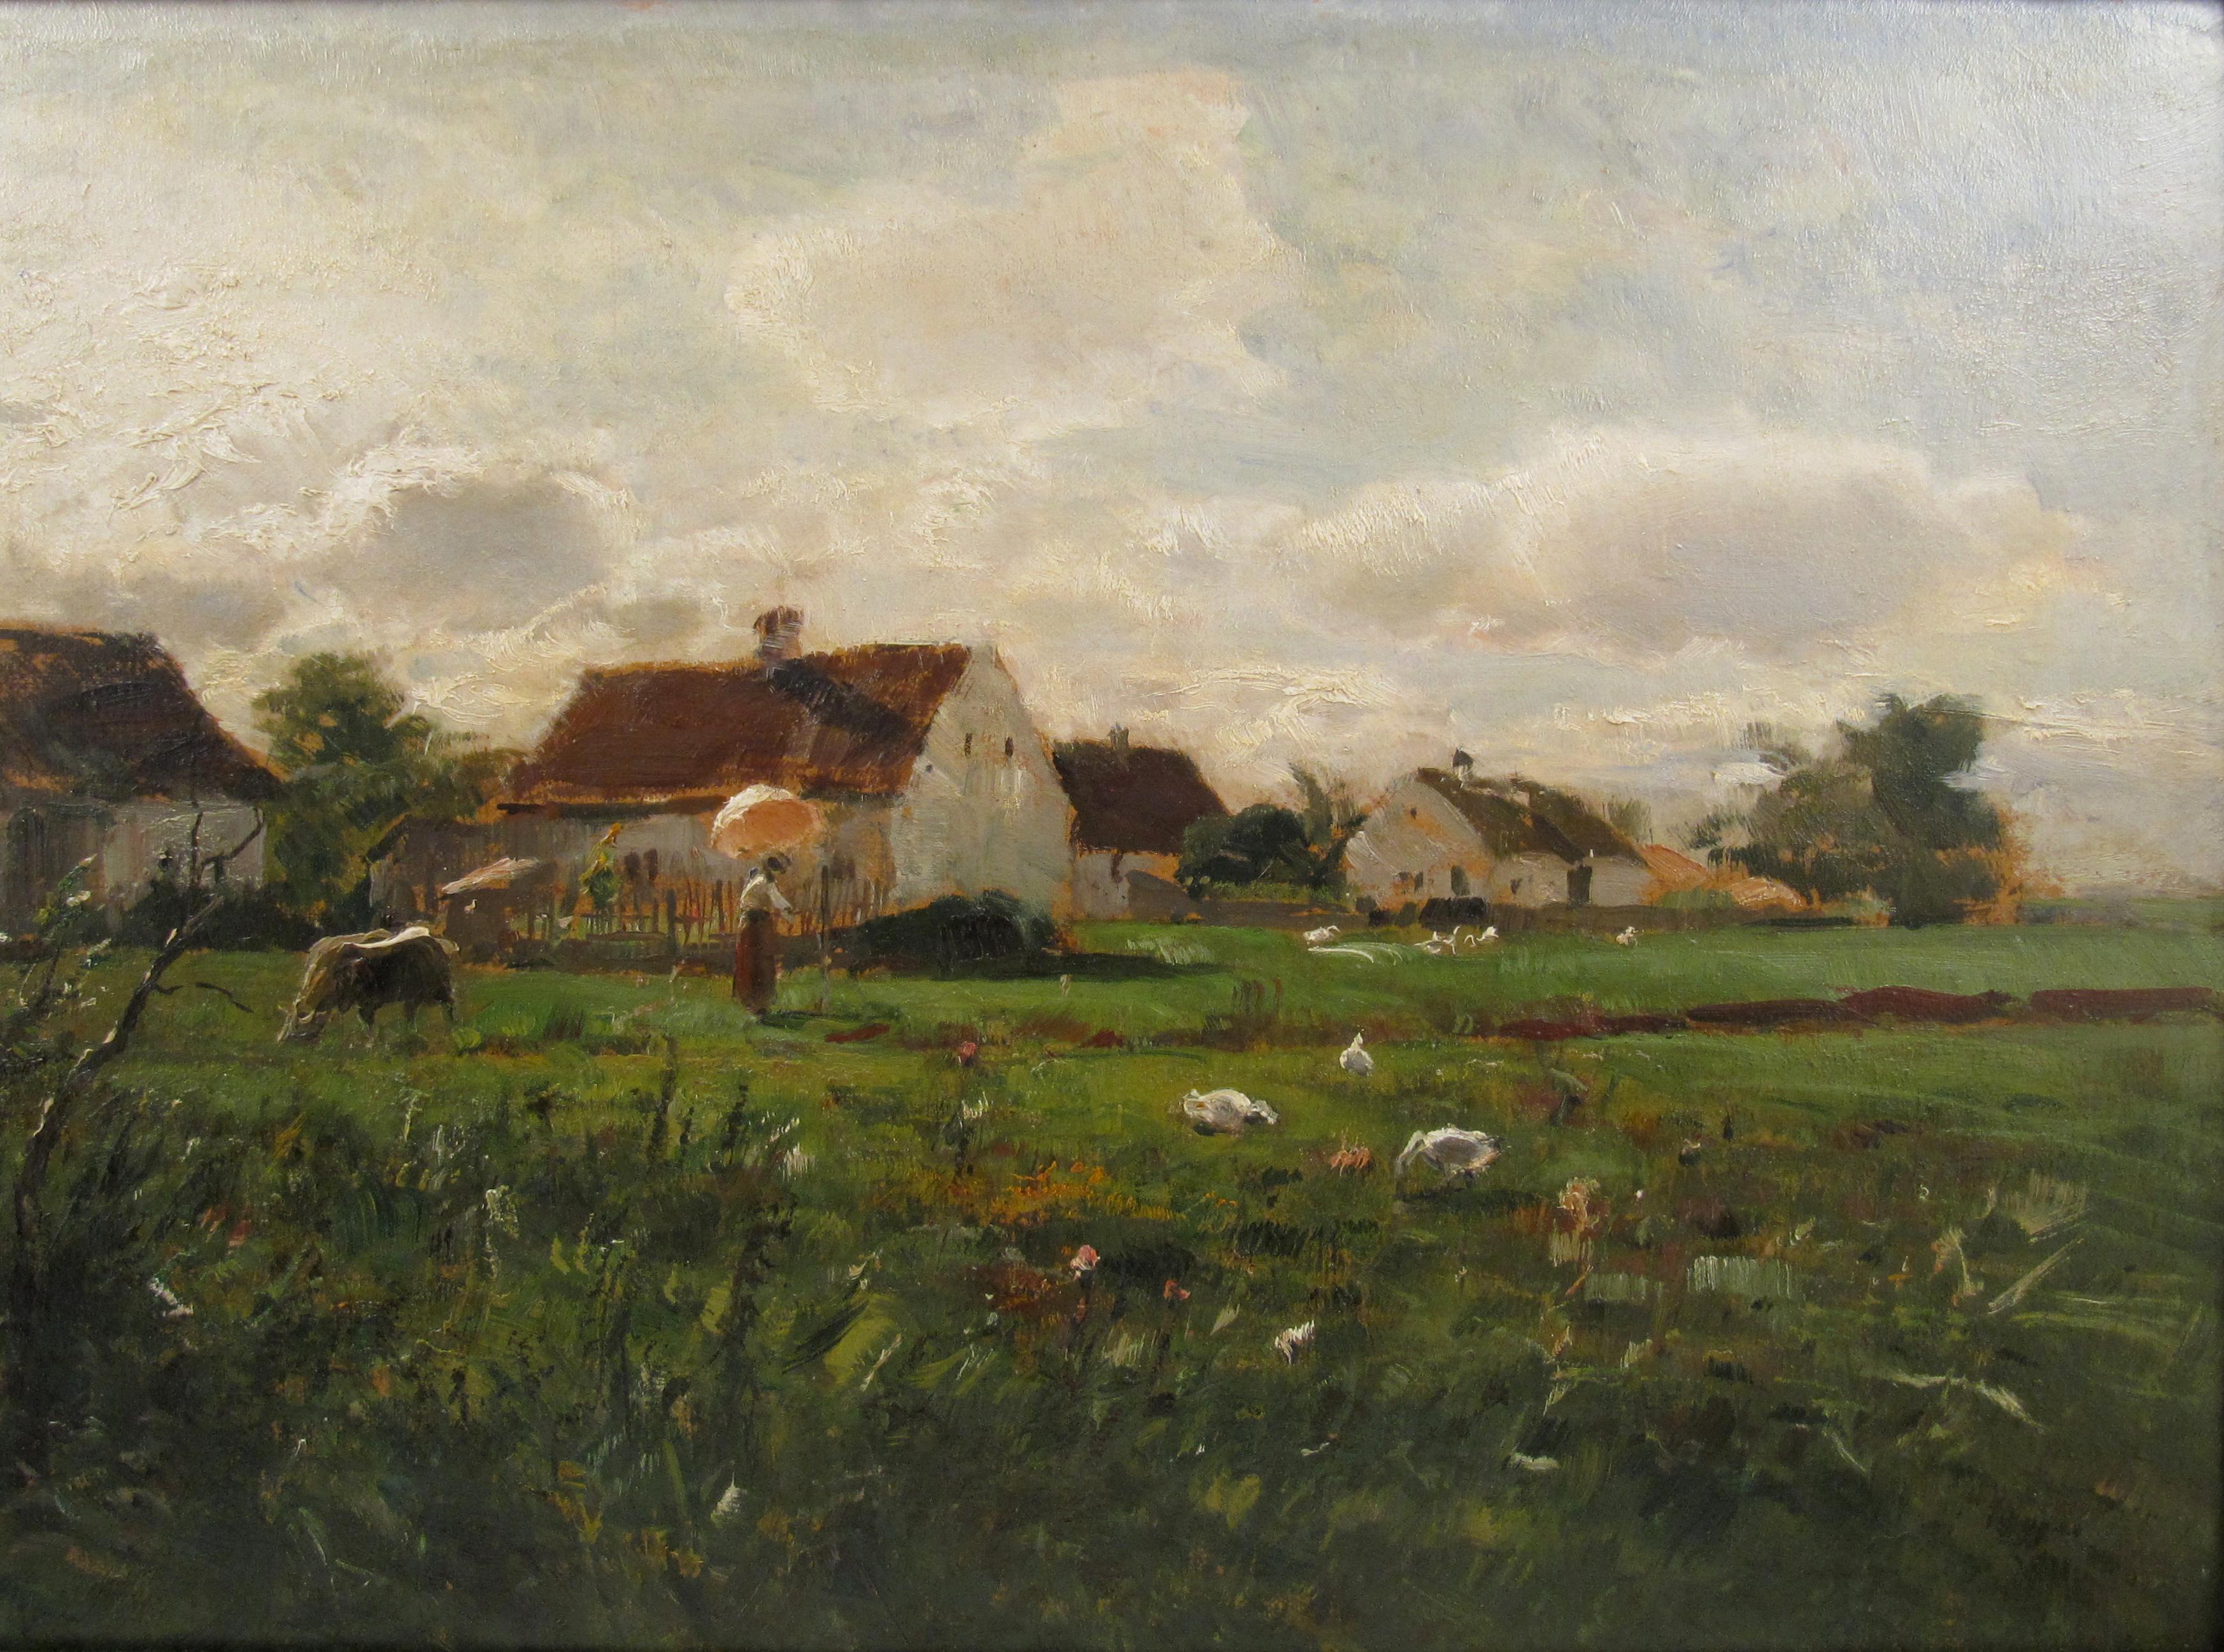 Sunday Promenade in the Countryside with Buildings, Cattle and Geese , 19thC - Painting by Nikolai von Astudin